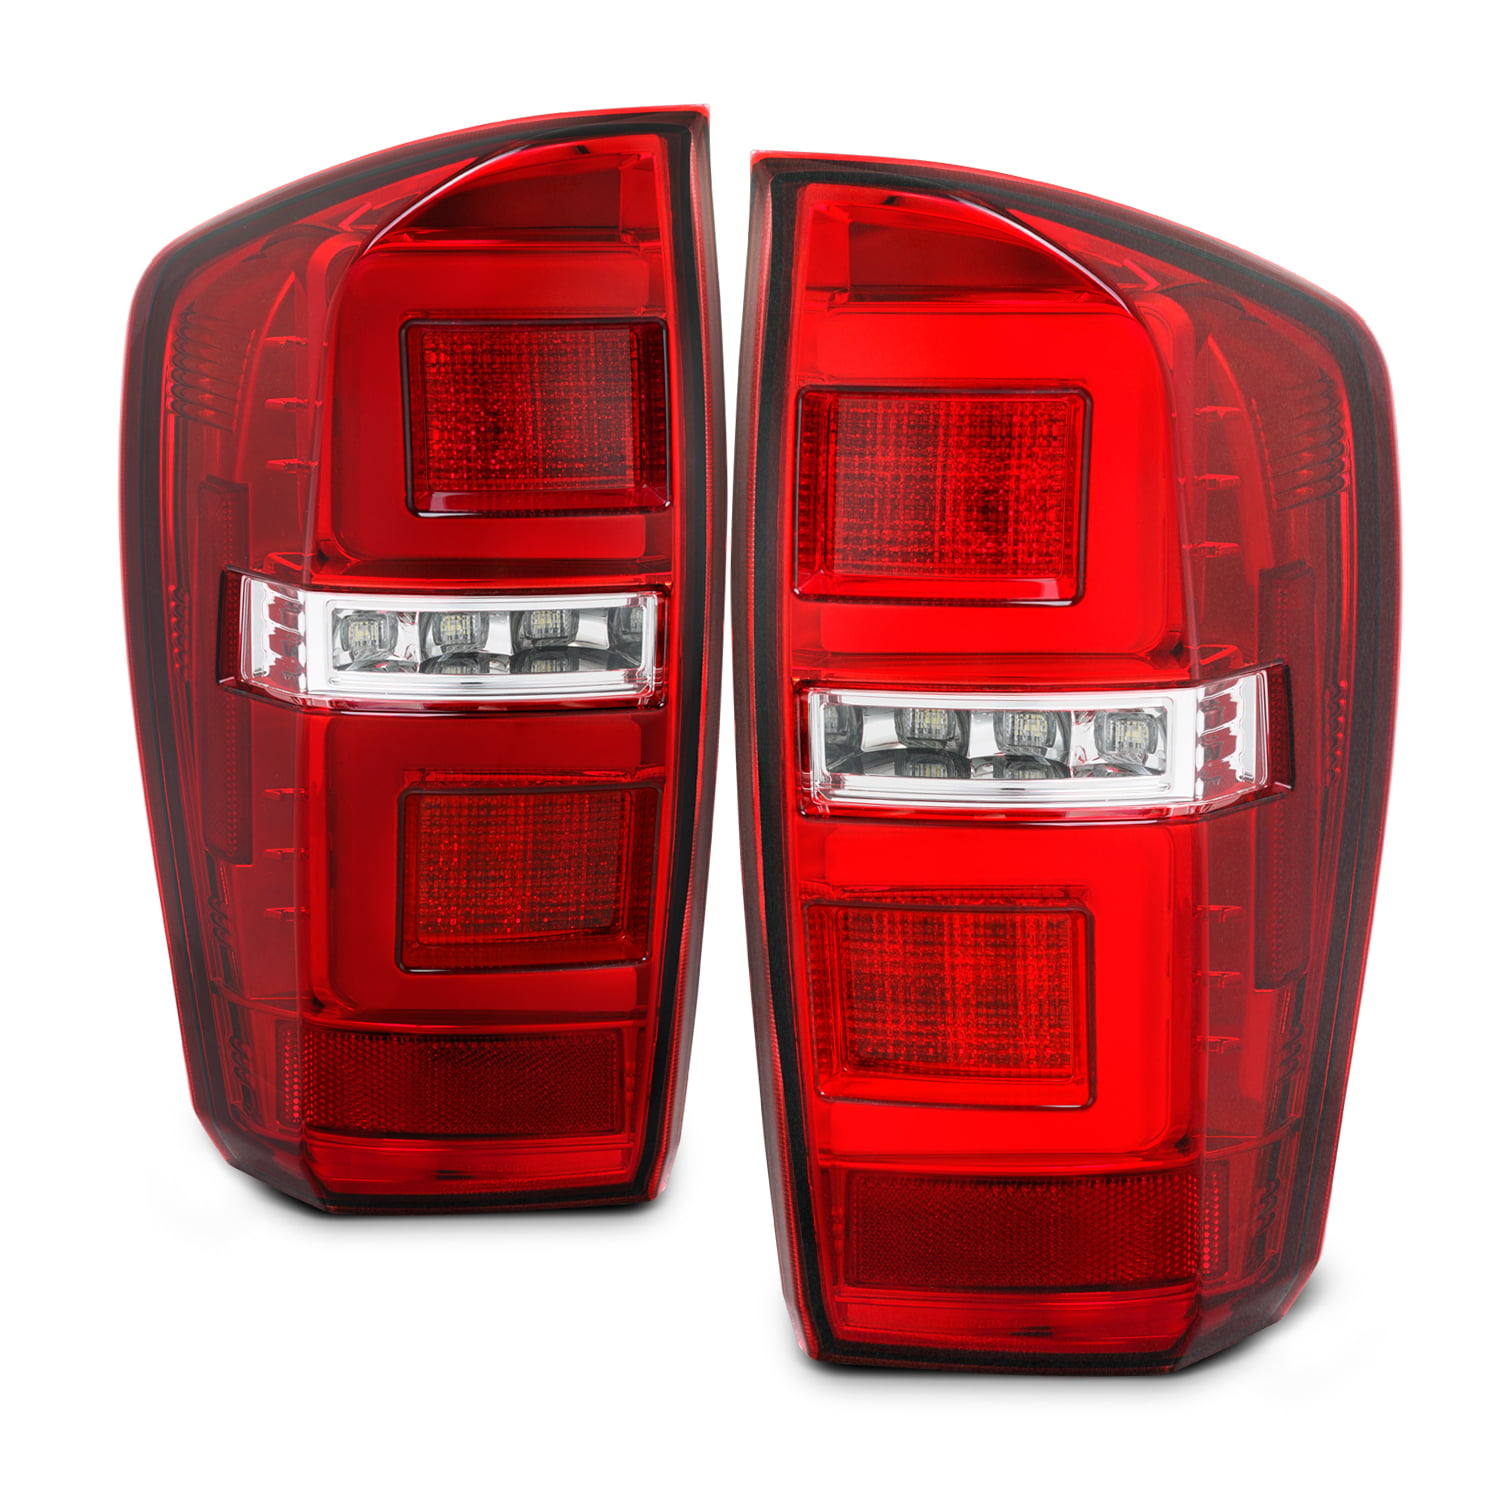 Anzo LED Tail Lights (Red/Clear) - 311050 Fits select: 2008-2016